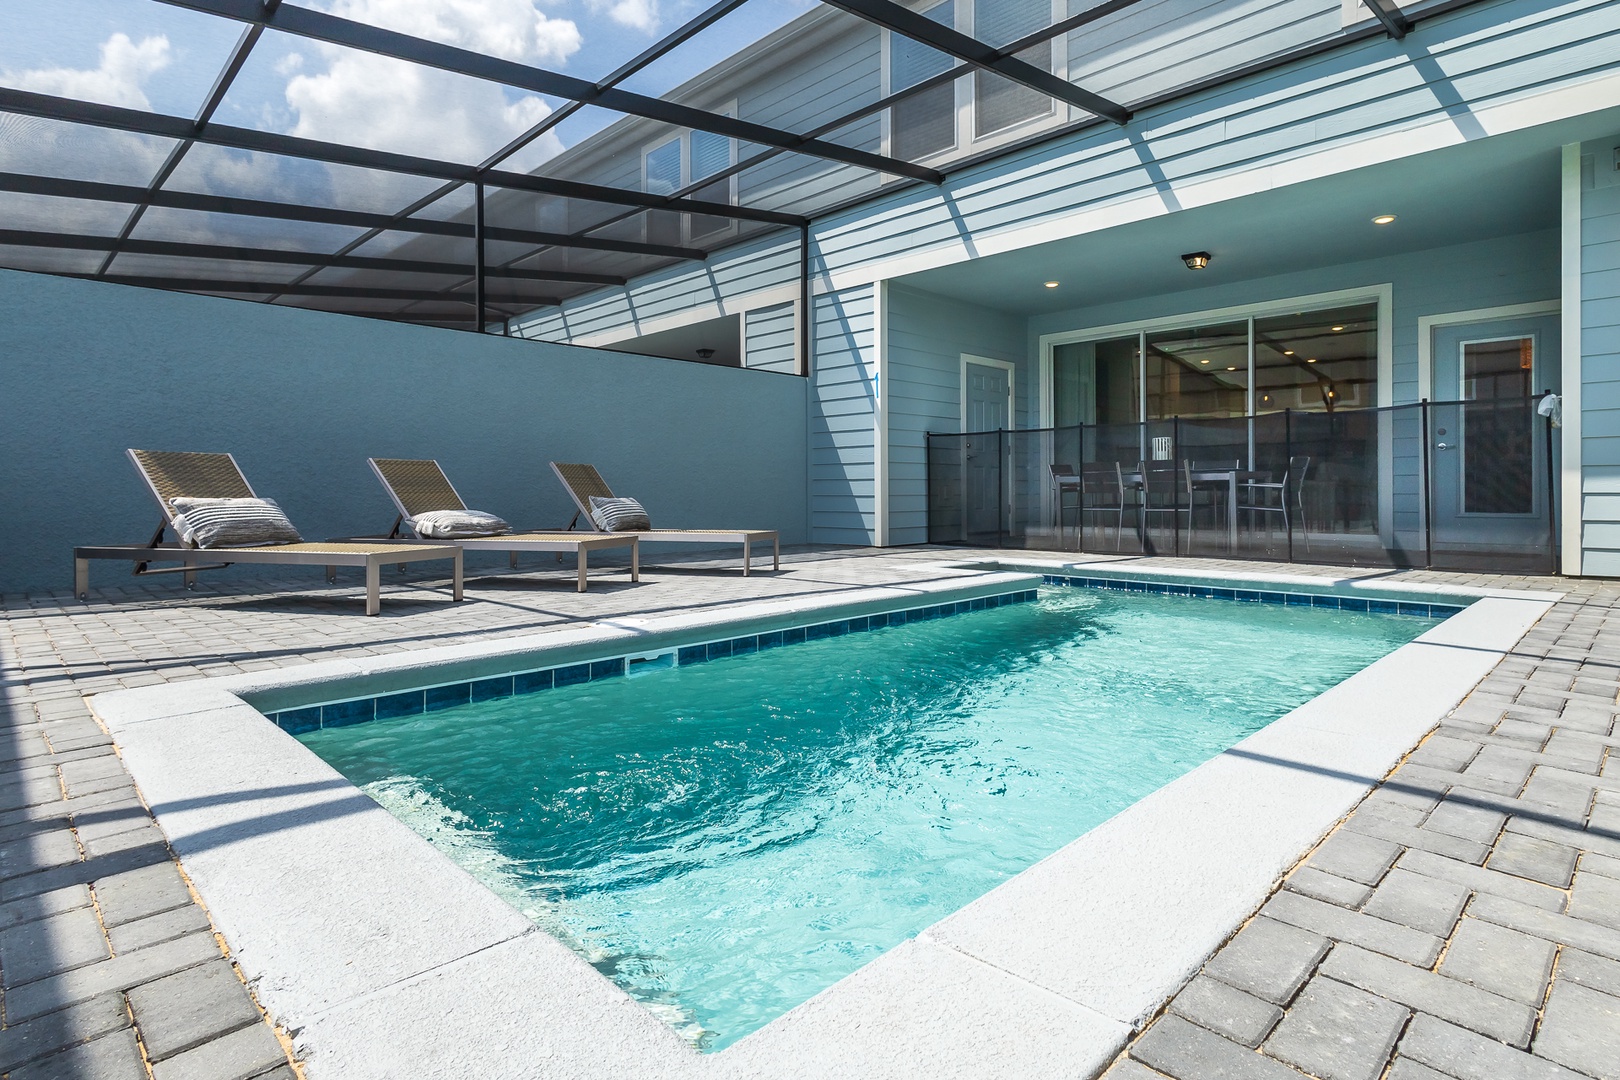 Lounge or make a splash in your own protected private pool